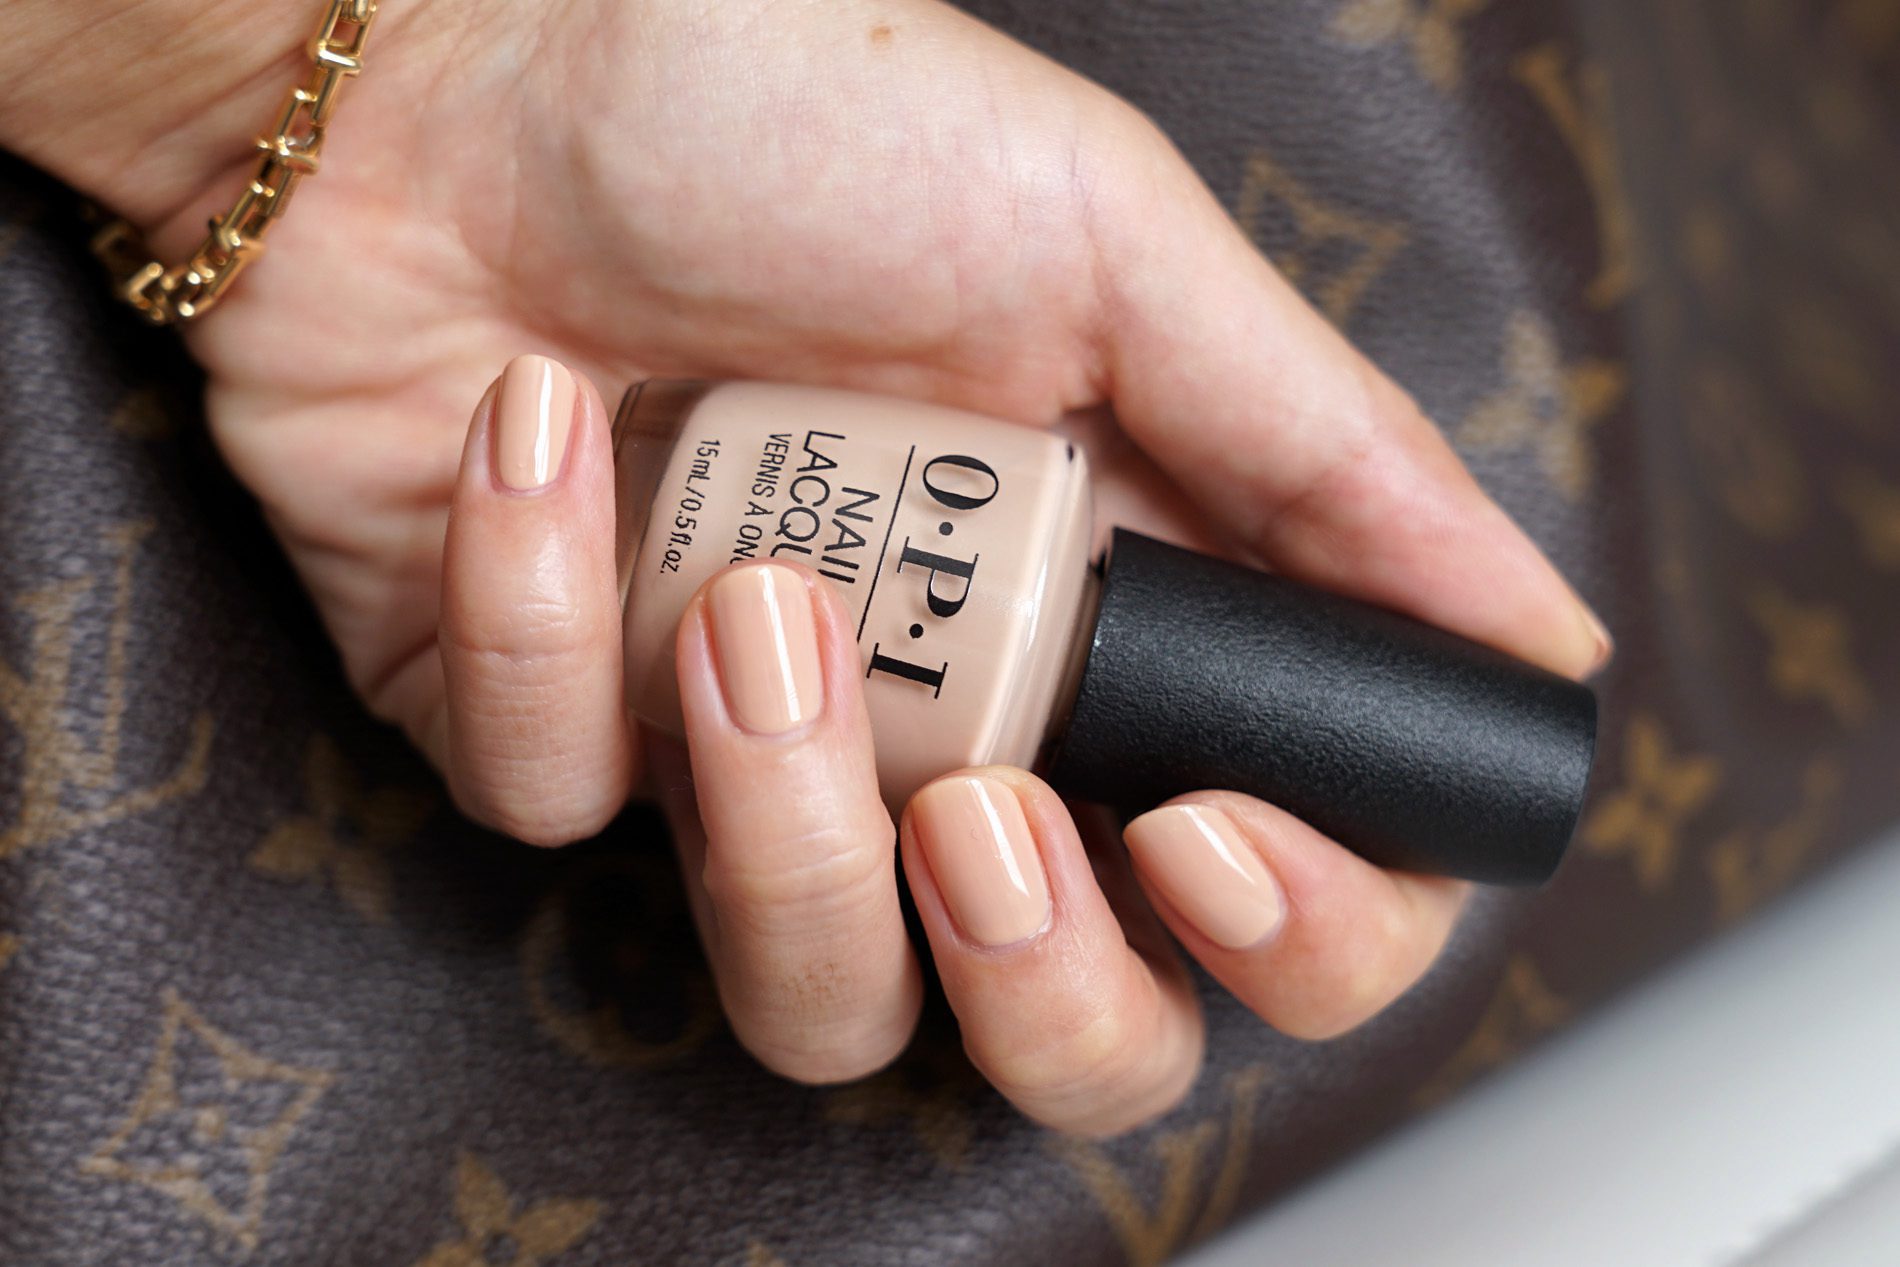 2. "Nude nail color for boudoir photography" - wide 4